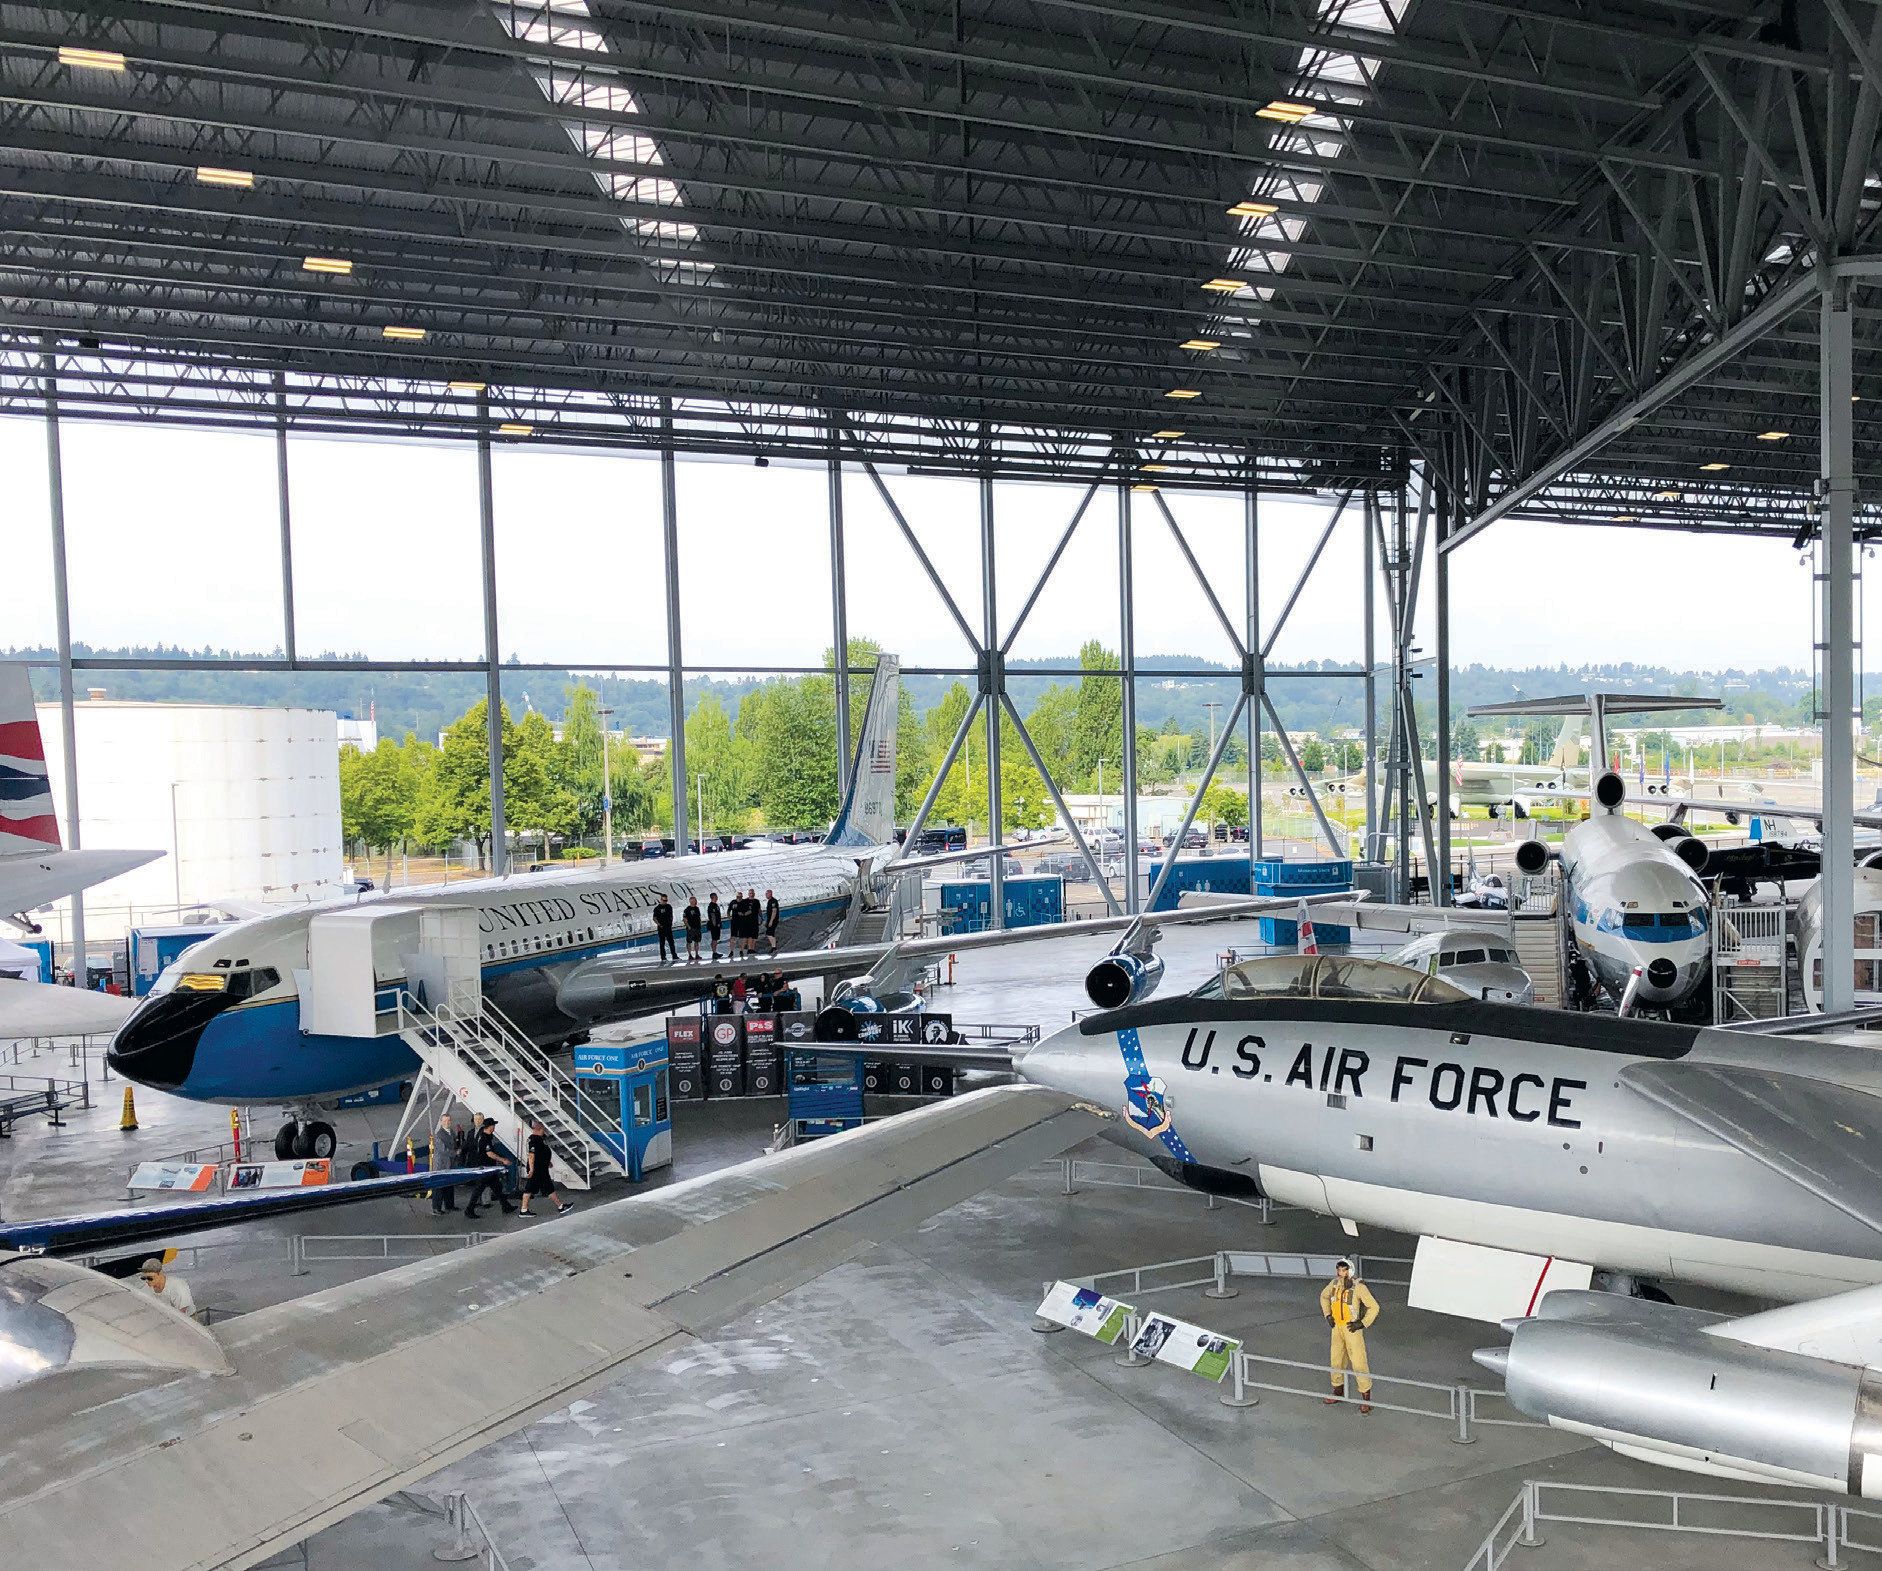 The Museum of Flight’s Aviation Pavilion during the 2019 detailing event.